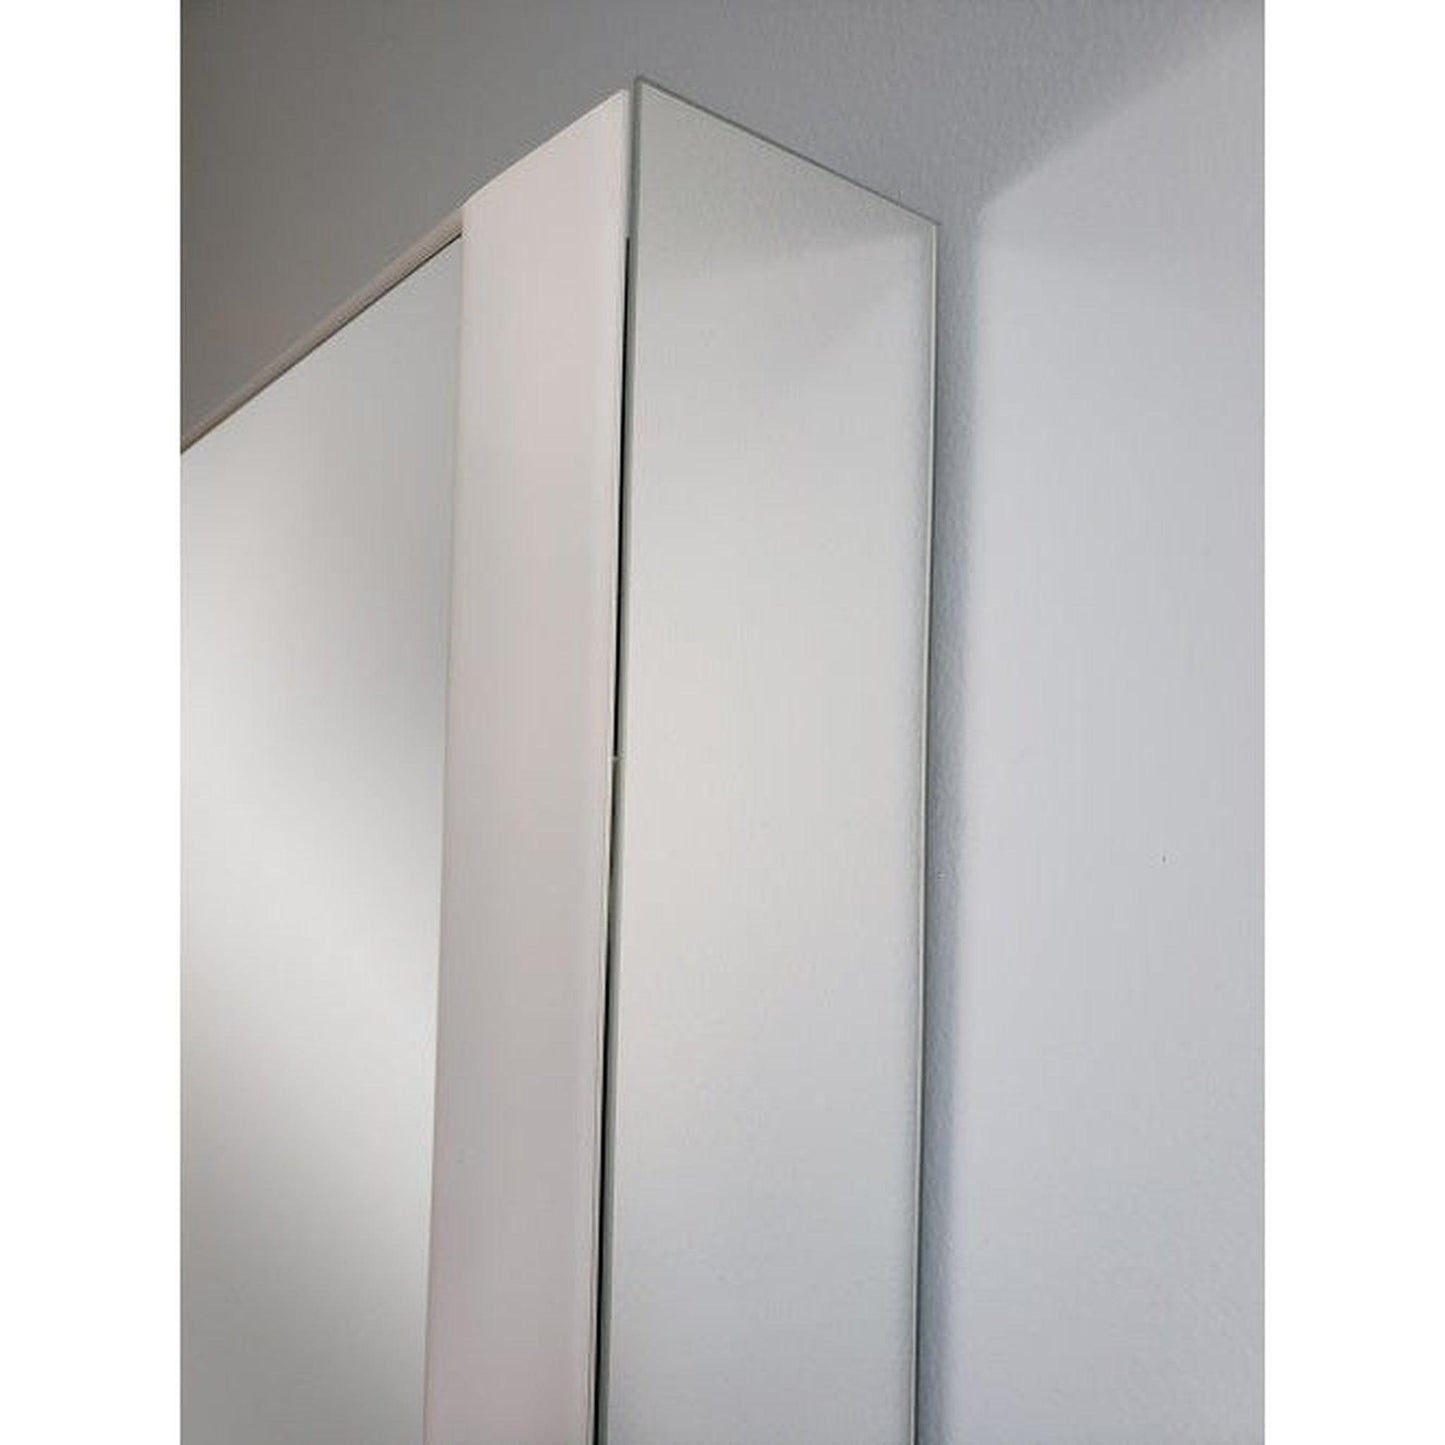 Sidler Quadro 32" x 36" 4000K 2 Offset Right Hinged Mirror Doors Anodized Aluminum Medicine Cabinet With Night Light Function, Built-in GFCI Outlet and USB port